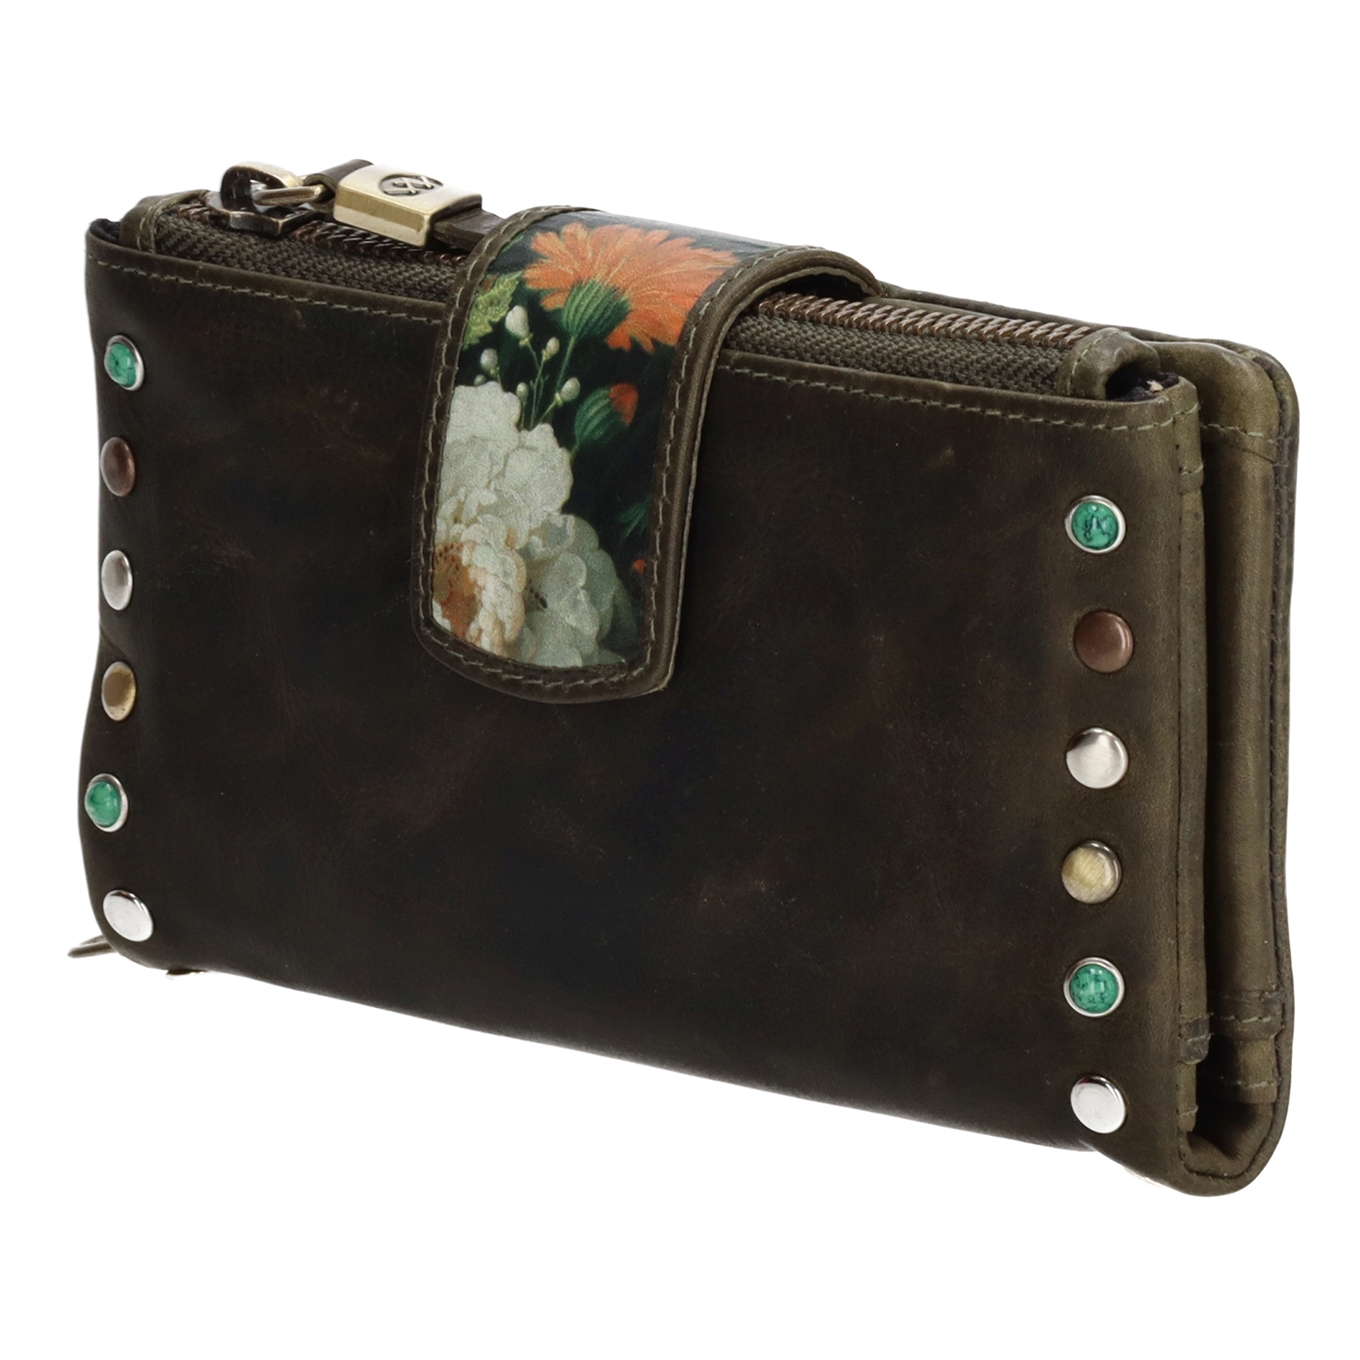 Micmacbags Masterpiece Wallet groen | Travelbags.be